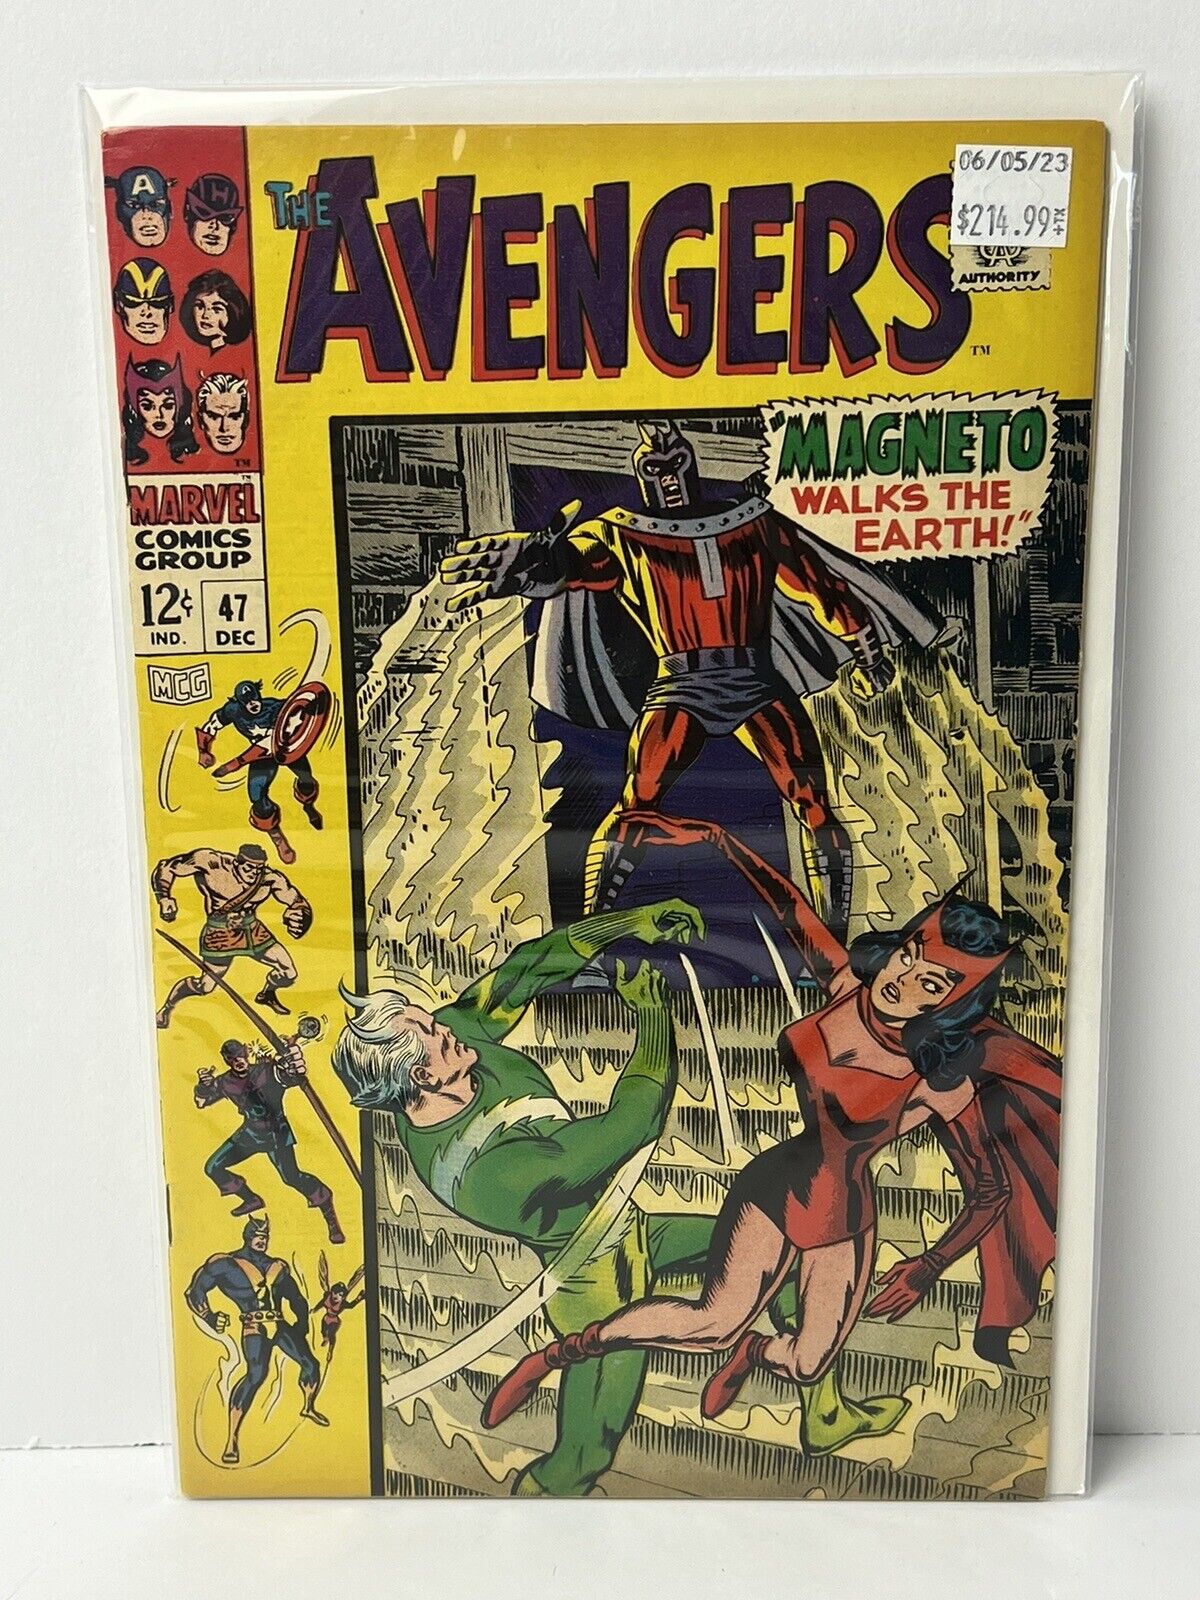 The Avengers #47 Marvel Comics 1967 Silver Age, Boarded